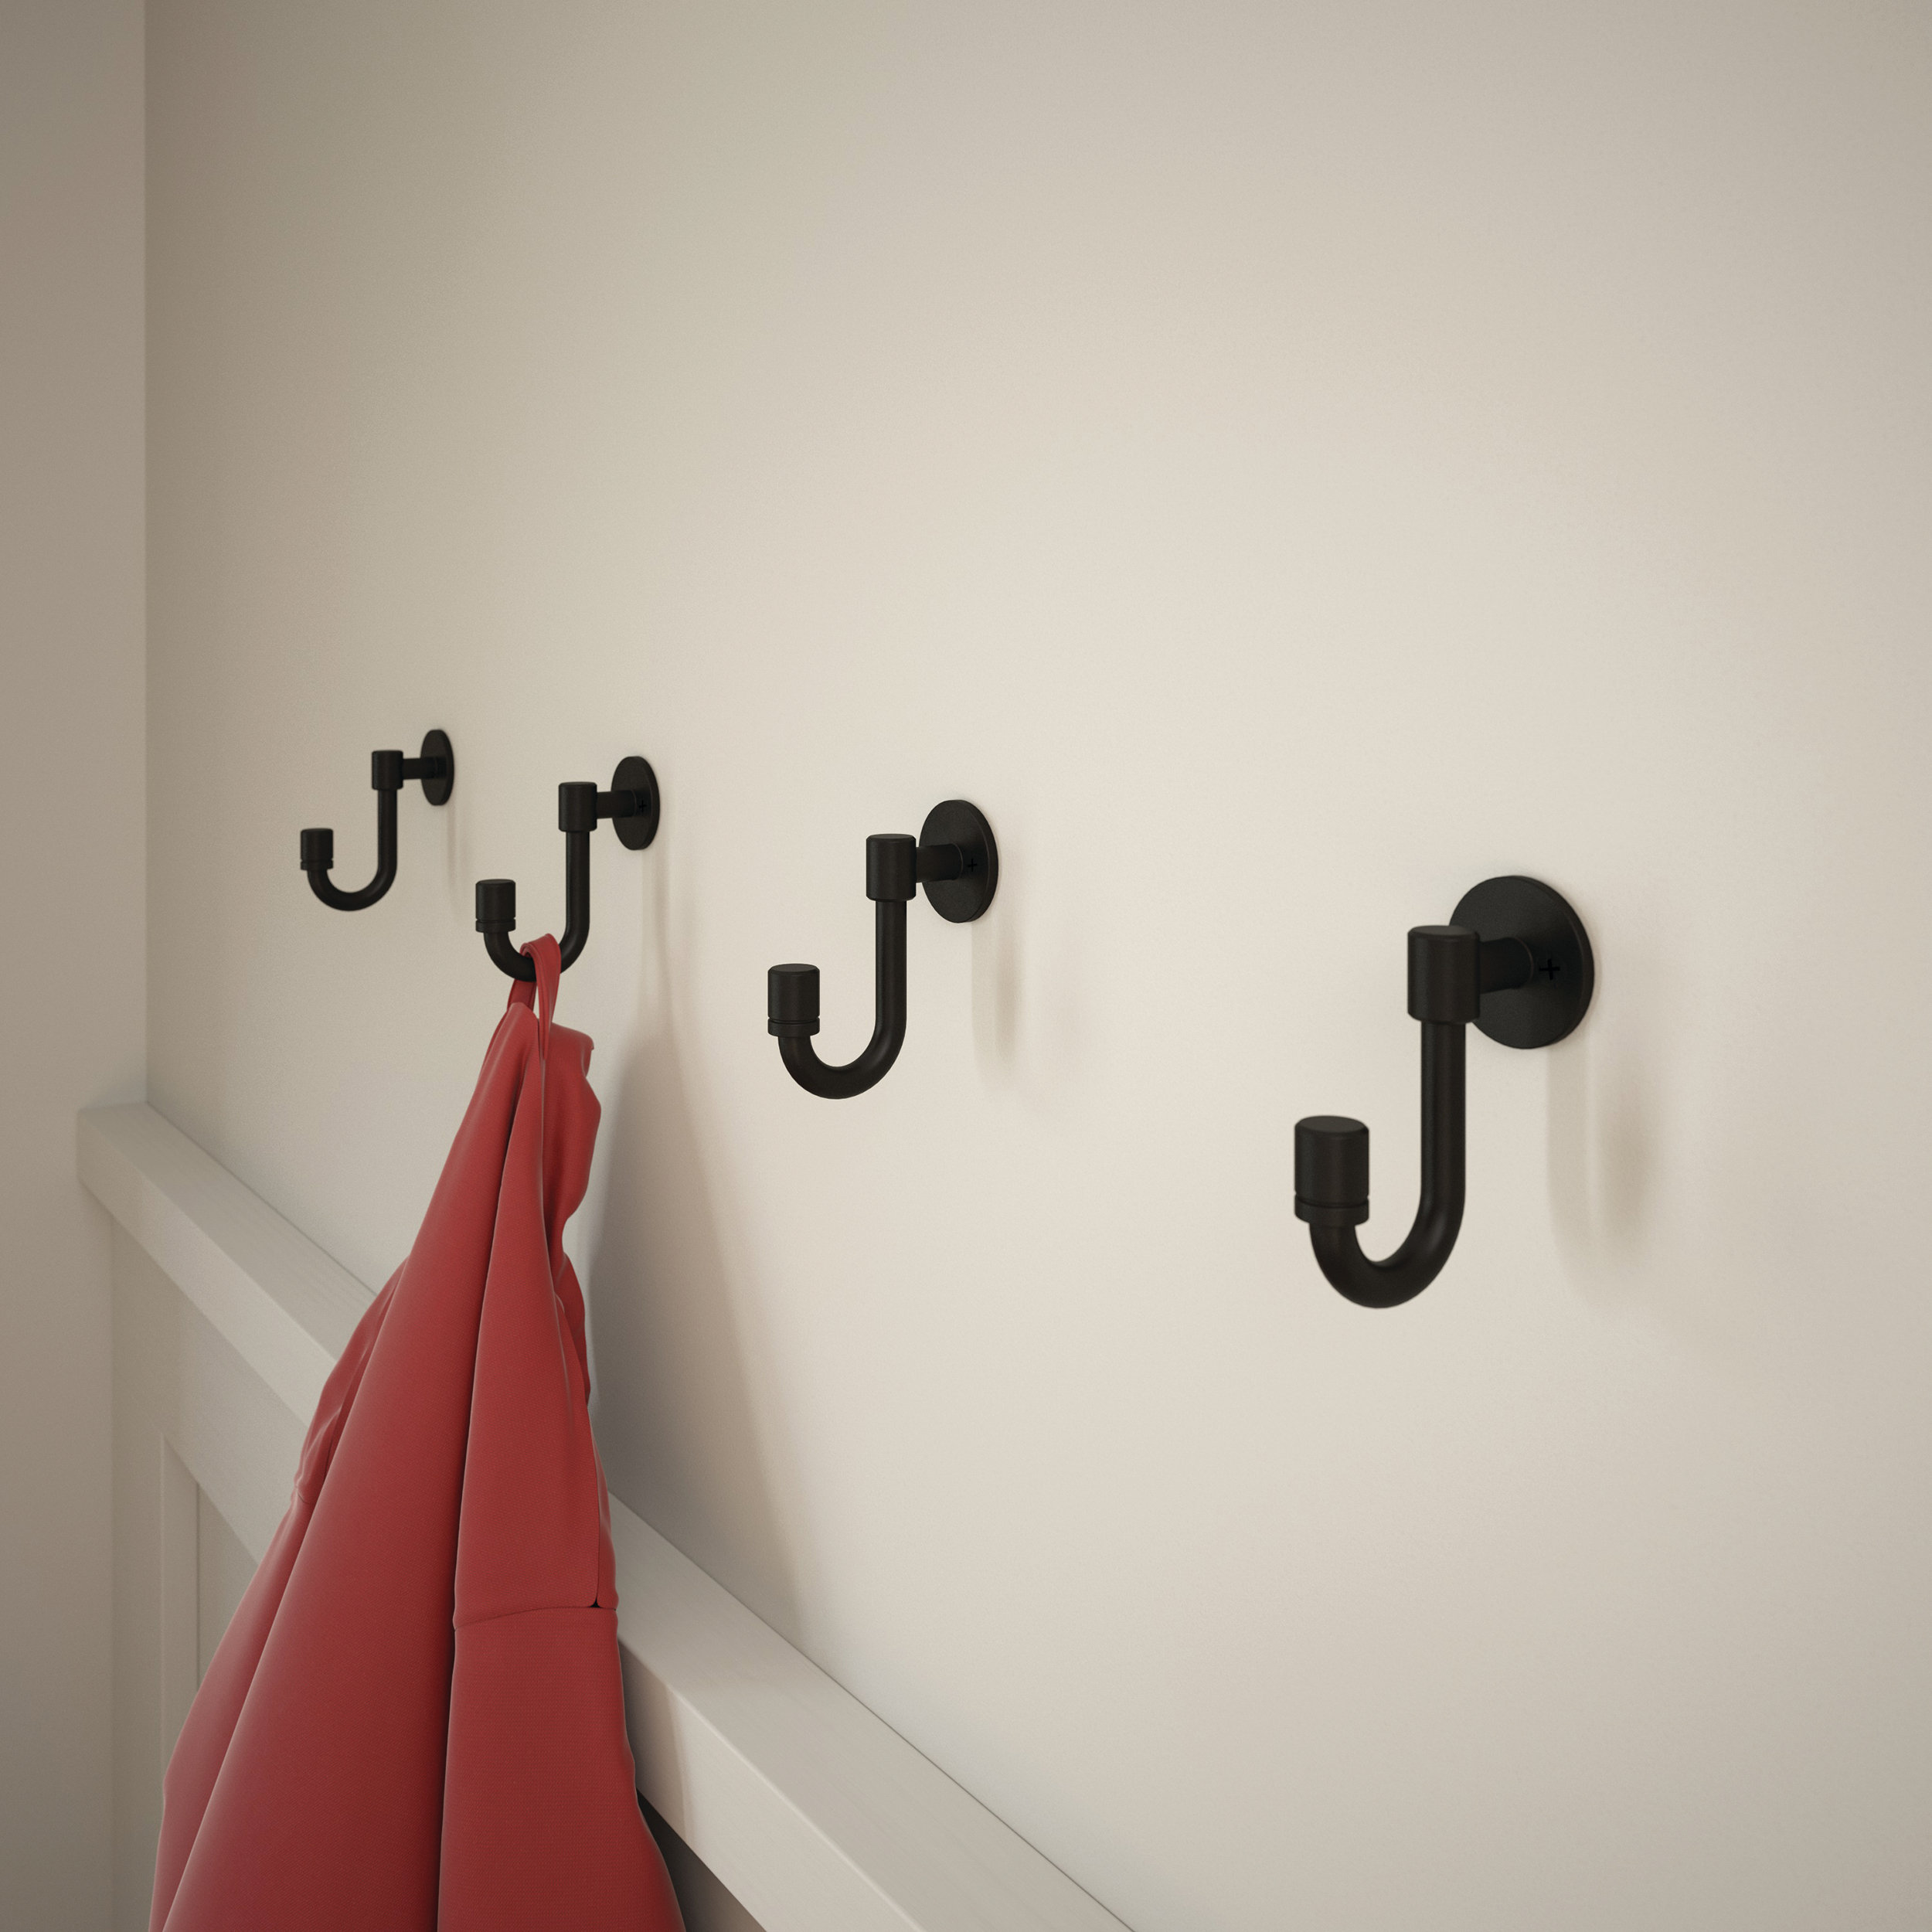  Franklin Brass Hook With 3 Prongs Wall Hooks 5-Pack